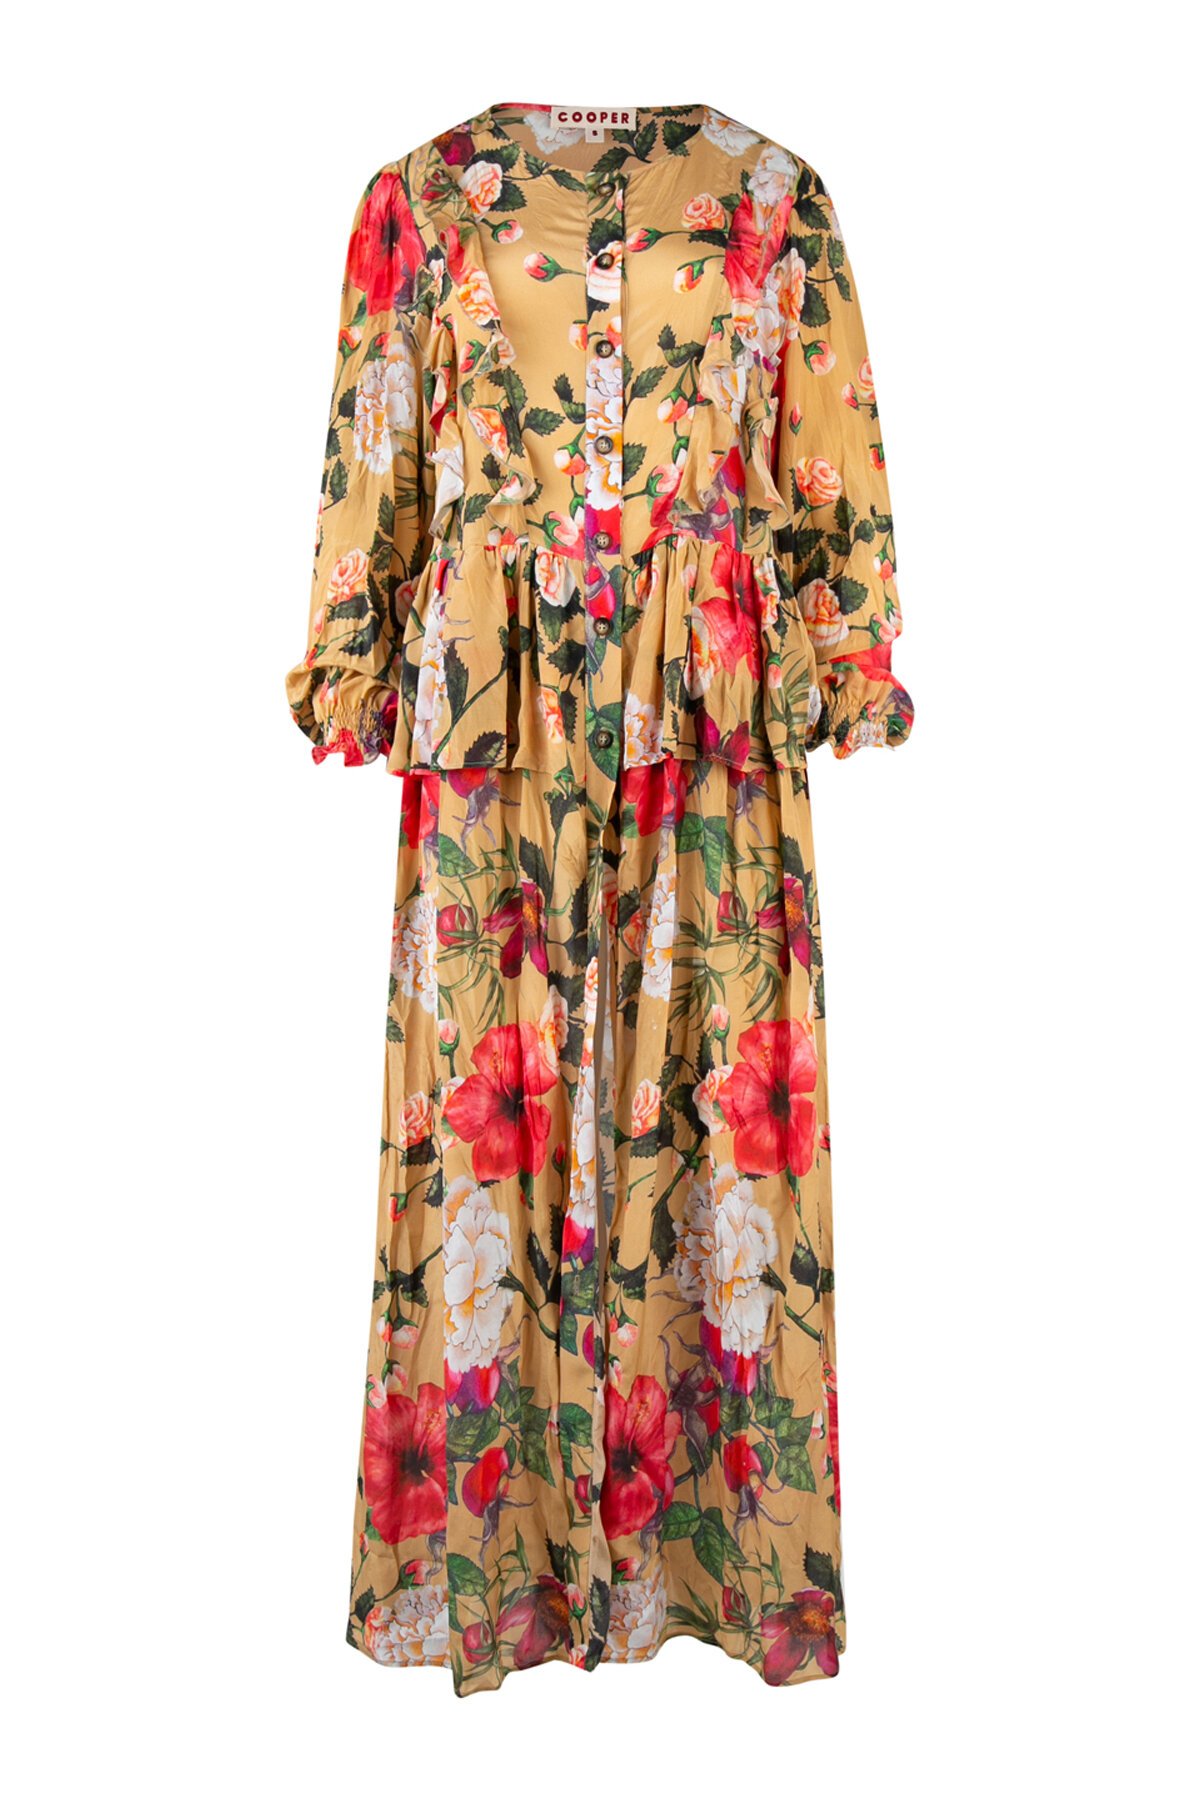 FLORAL OPENING Dress - Cooper : Trelise Cooper Online - YOU HAD ME AT ...